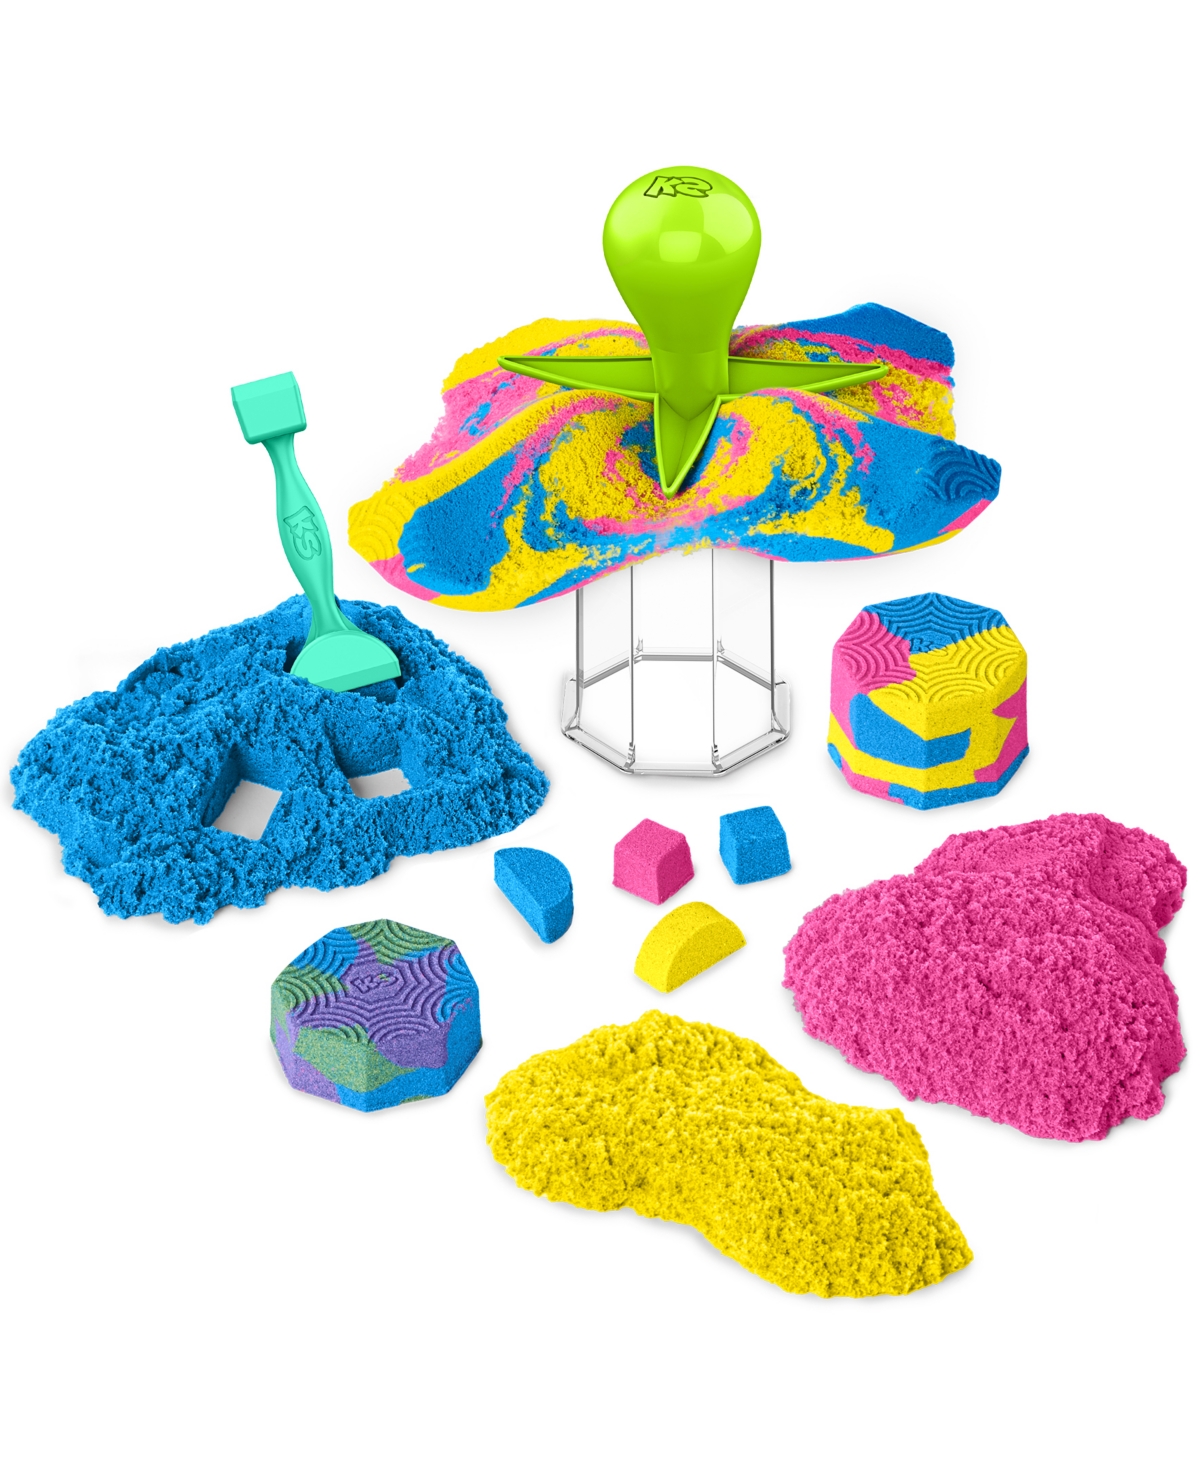 Squish N Create with Blue, Yellow, and Pink Play Sand - Multi-color